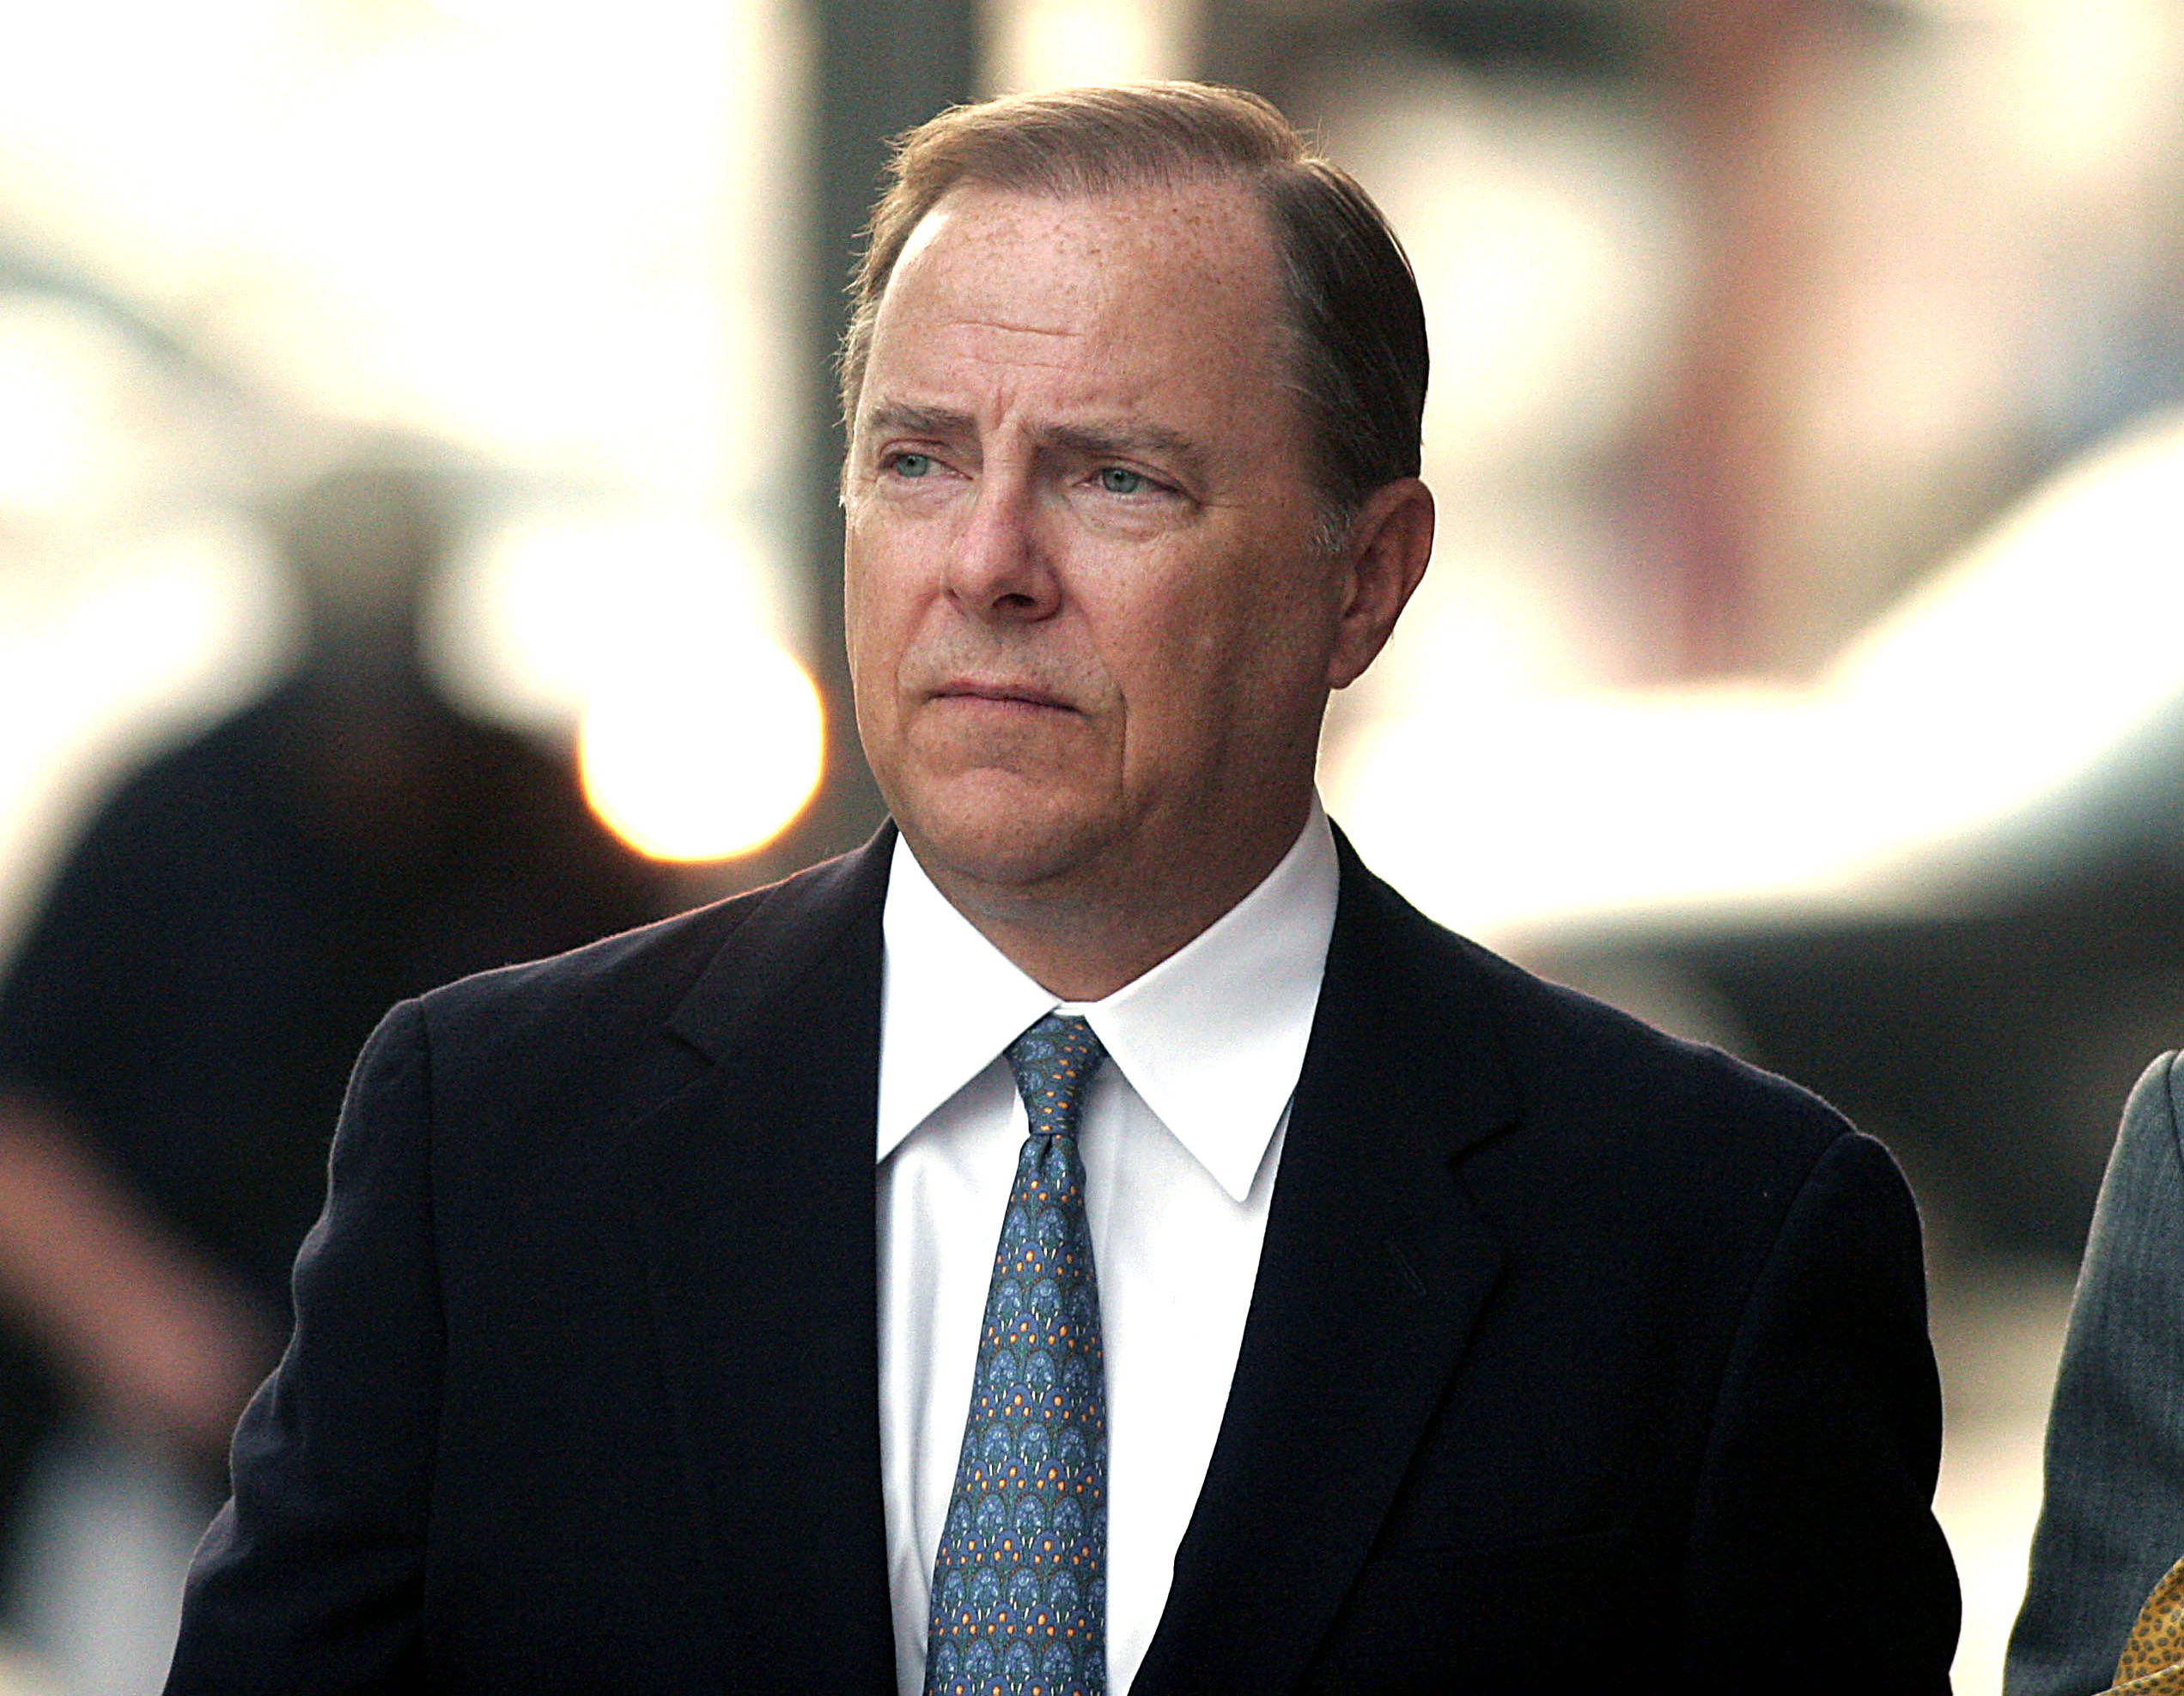 Enron’s Jeff Skilling May Get Decade Off Sentence in Deal ...